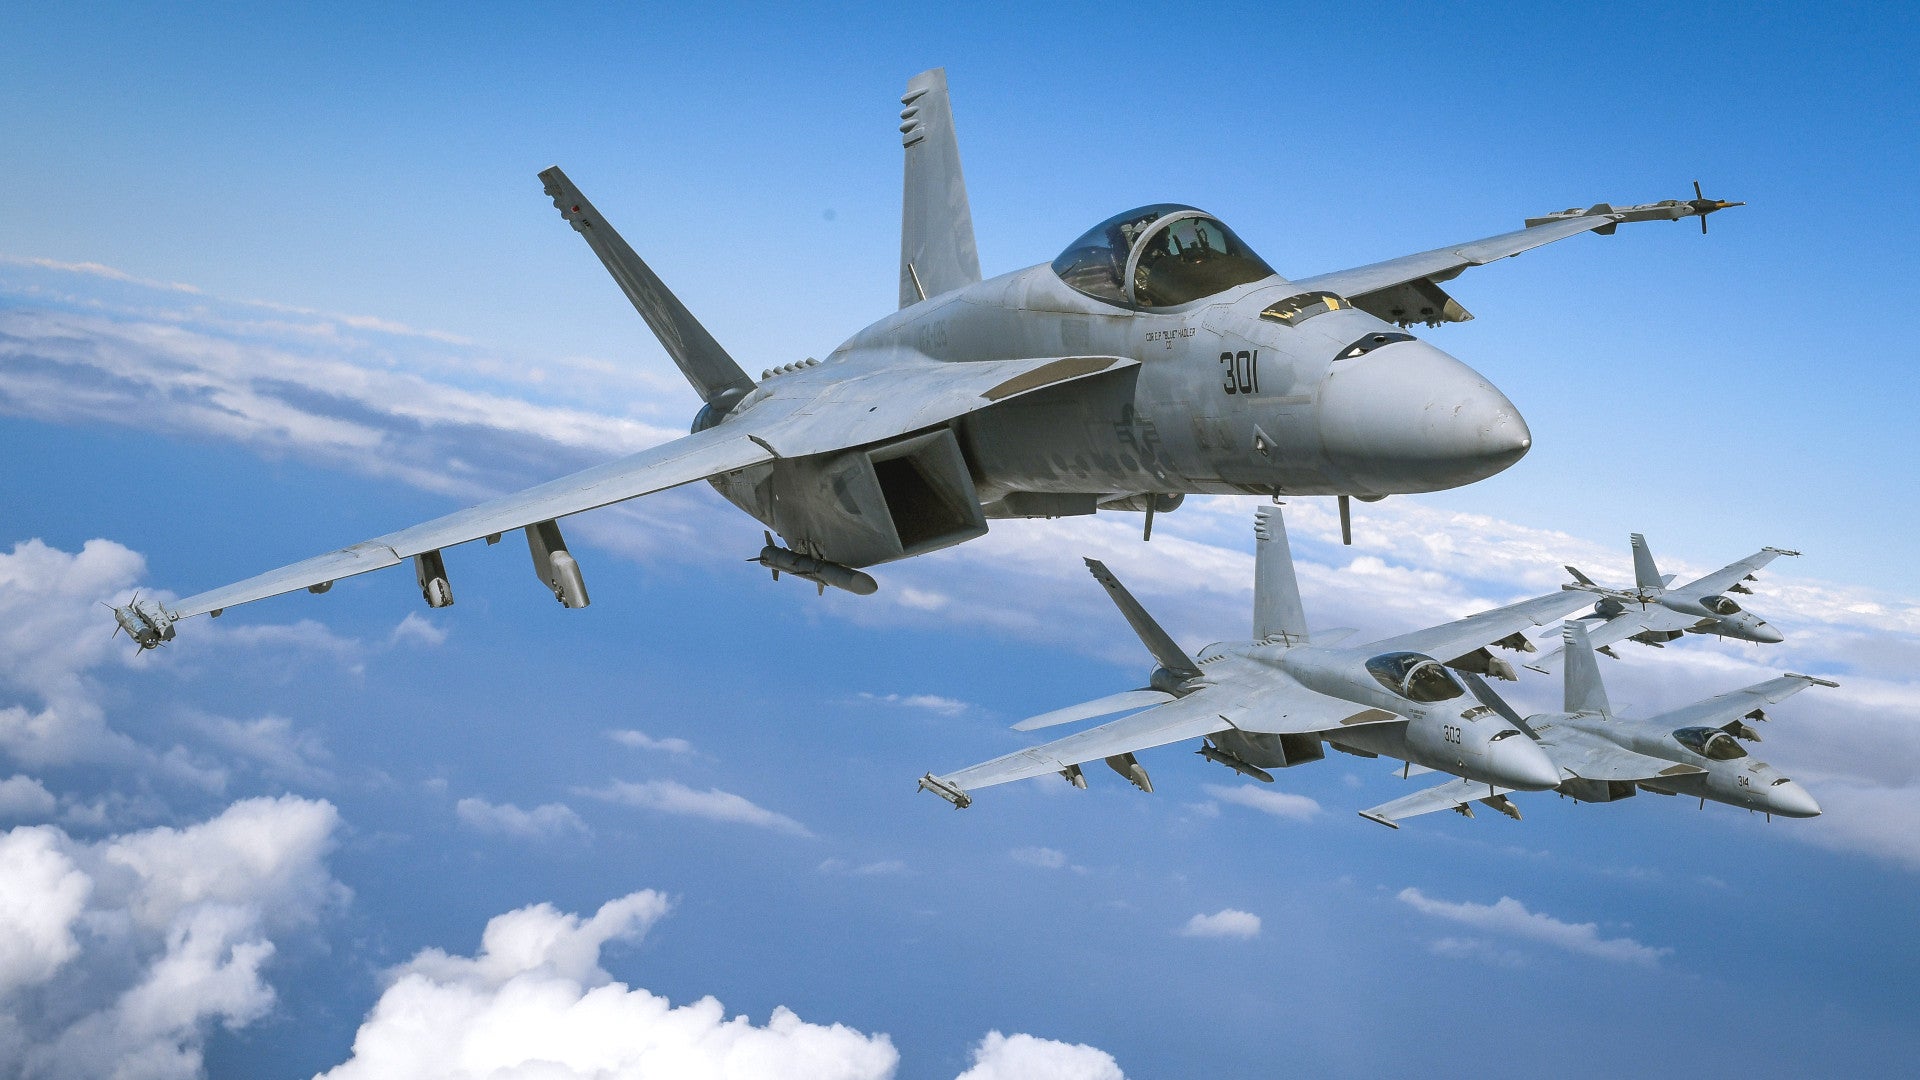 Here’s Where Boeing Aims To Take The Super Hornet In The Decades To Come